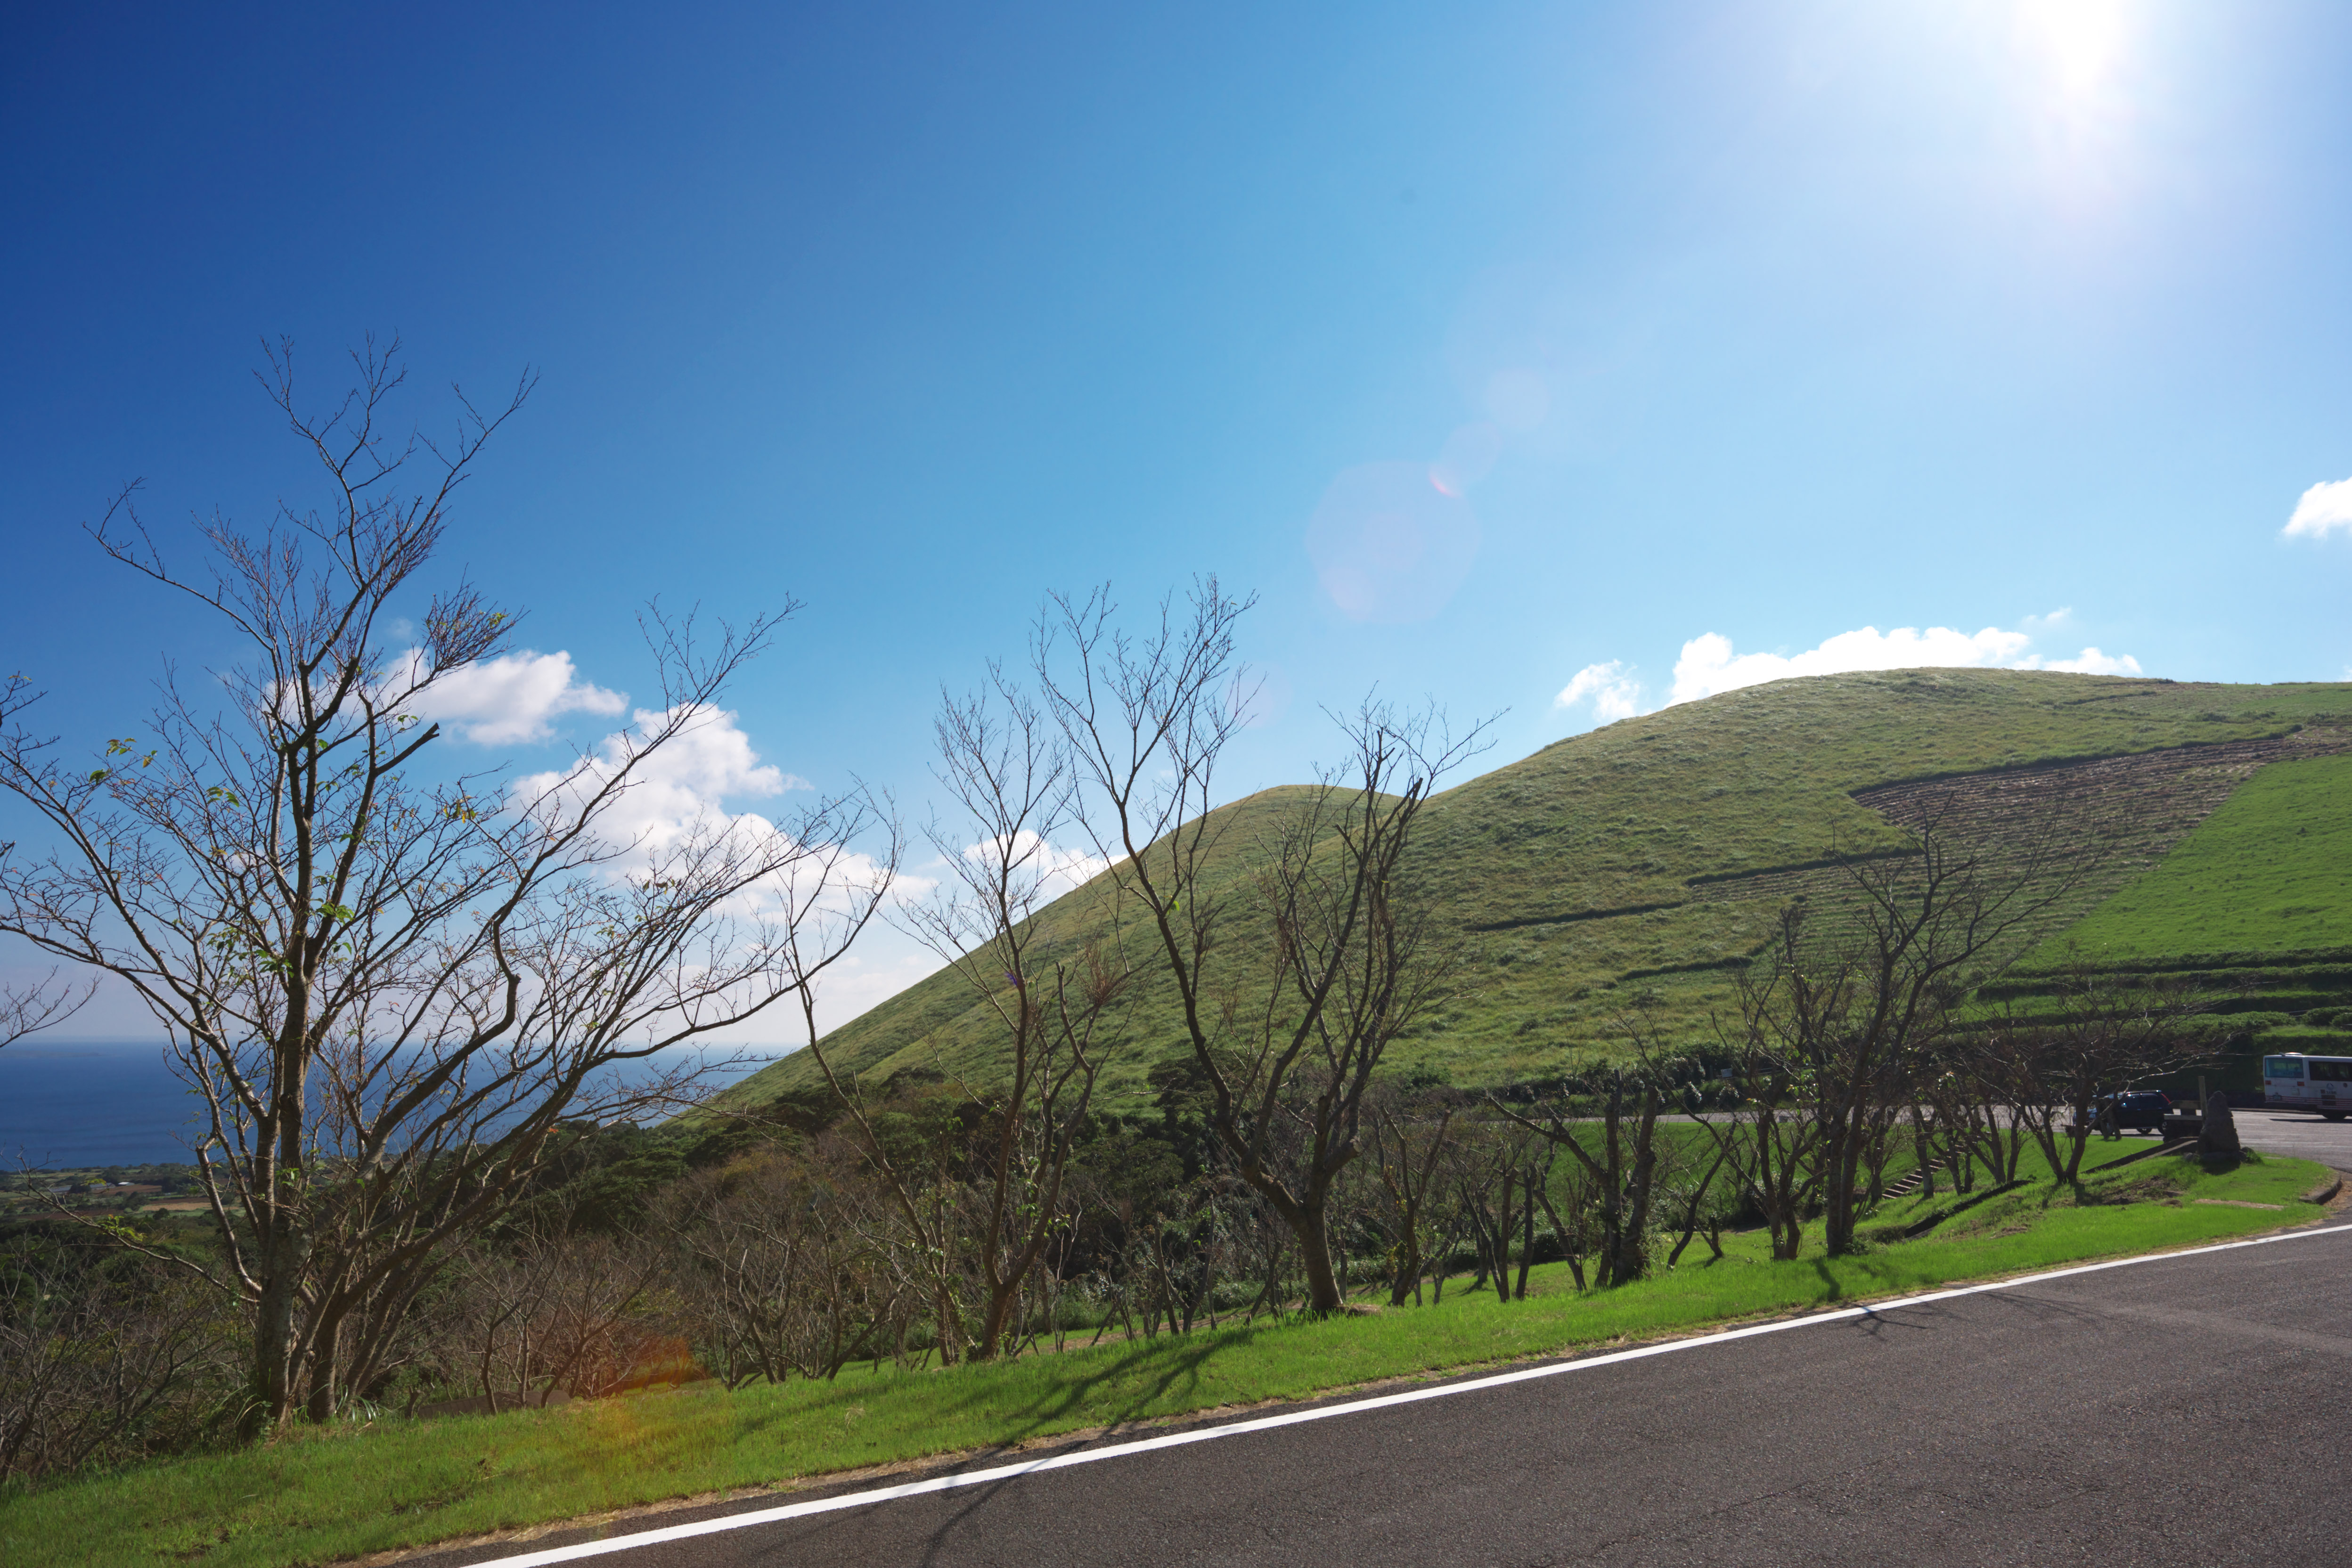 photo,material,free,landscape,picture,stock photo,Creative Commons,Mt. ogre, Lava, The sea, field, cycling road